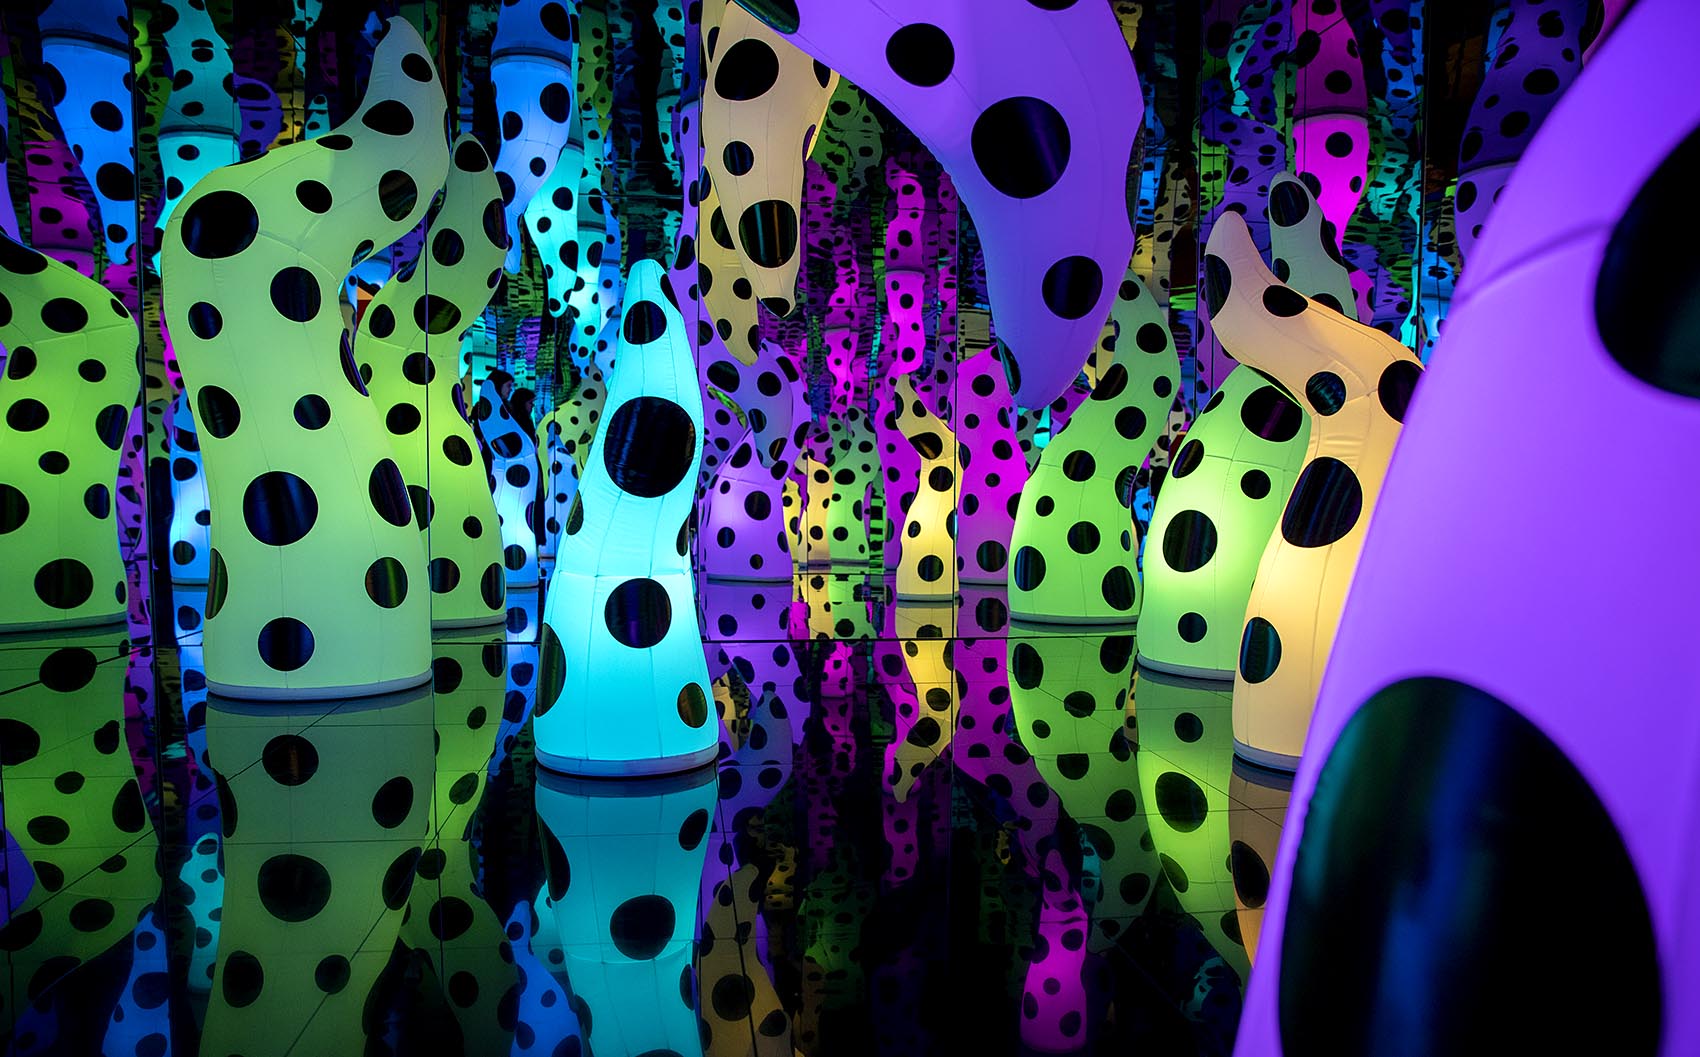 Japanese contemporary artist Yayoi Kusama is returning to NYC with another  infinity mirror room